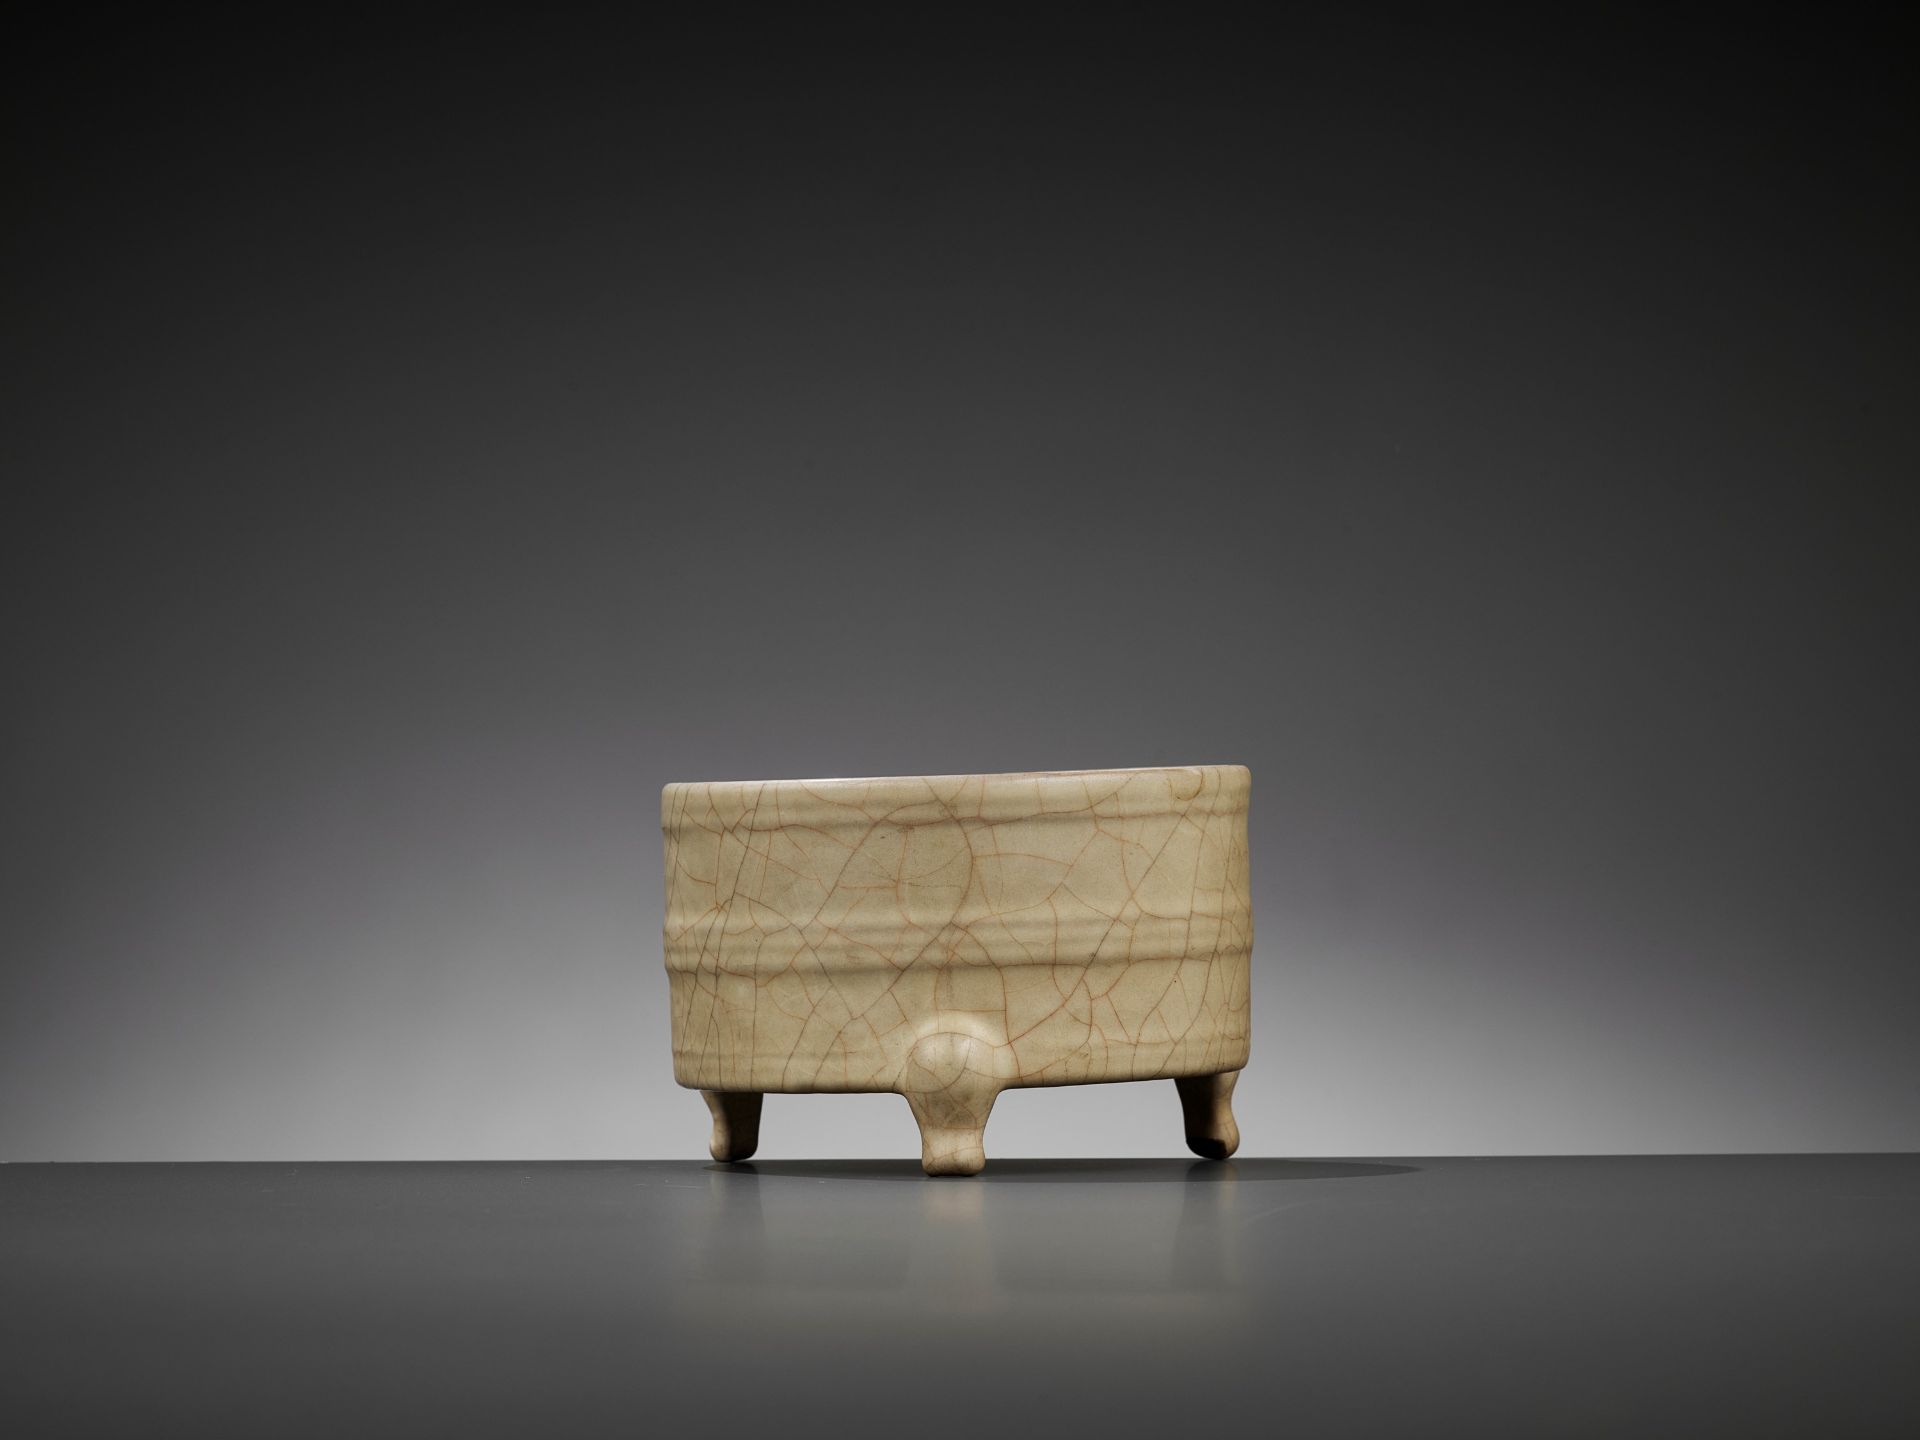 A GUAN-TYPE 'LIAN' TRIPOD CENSER, SONG DYNASTY - Image 4 of 16